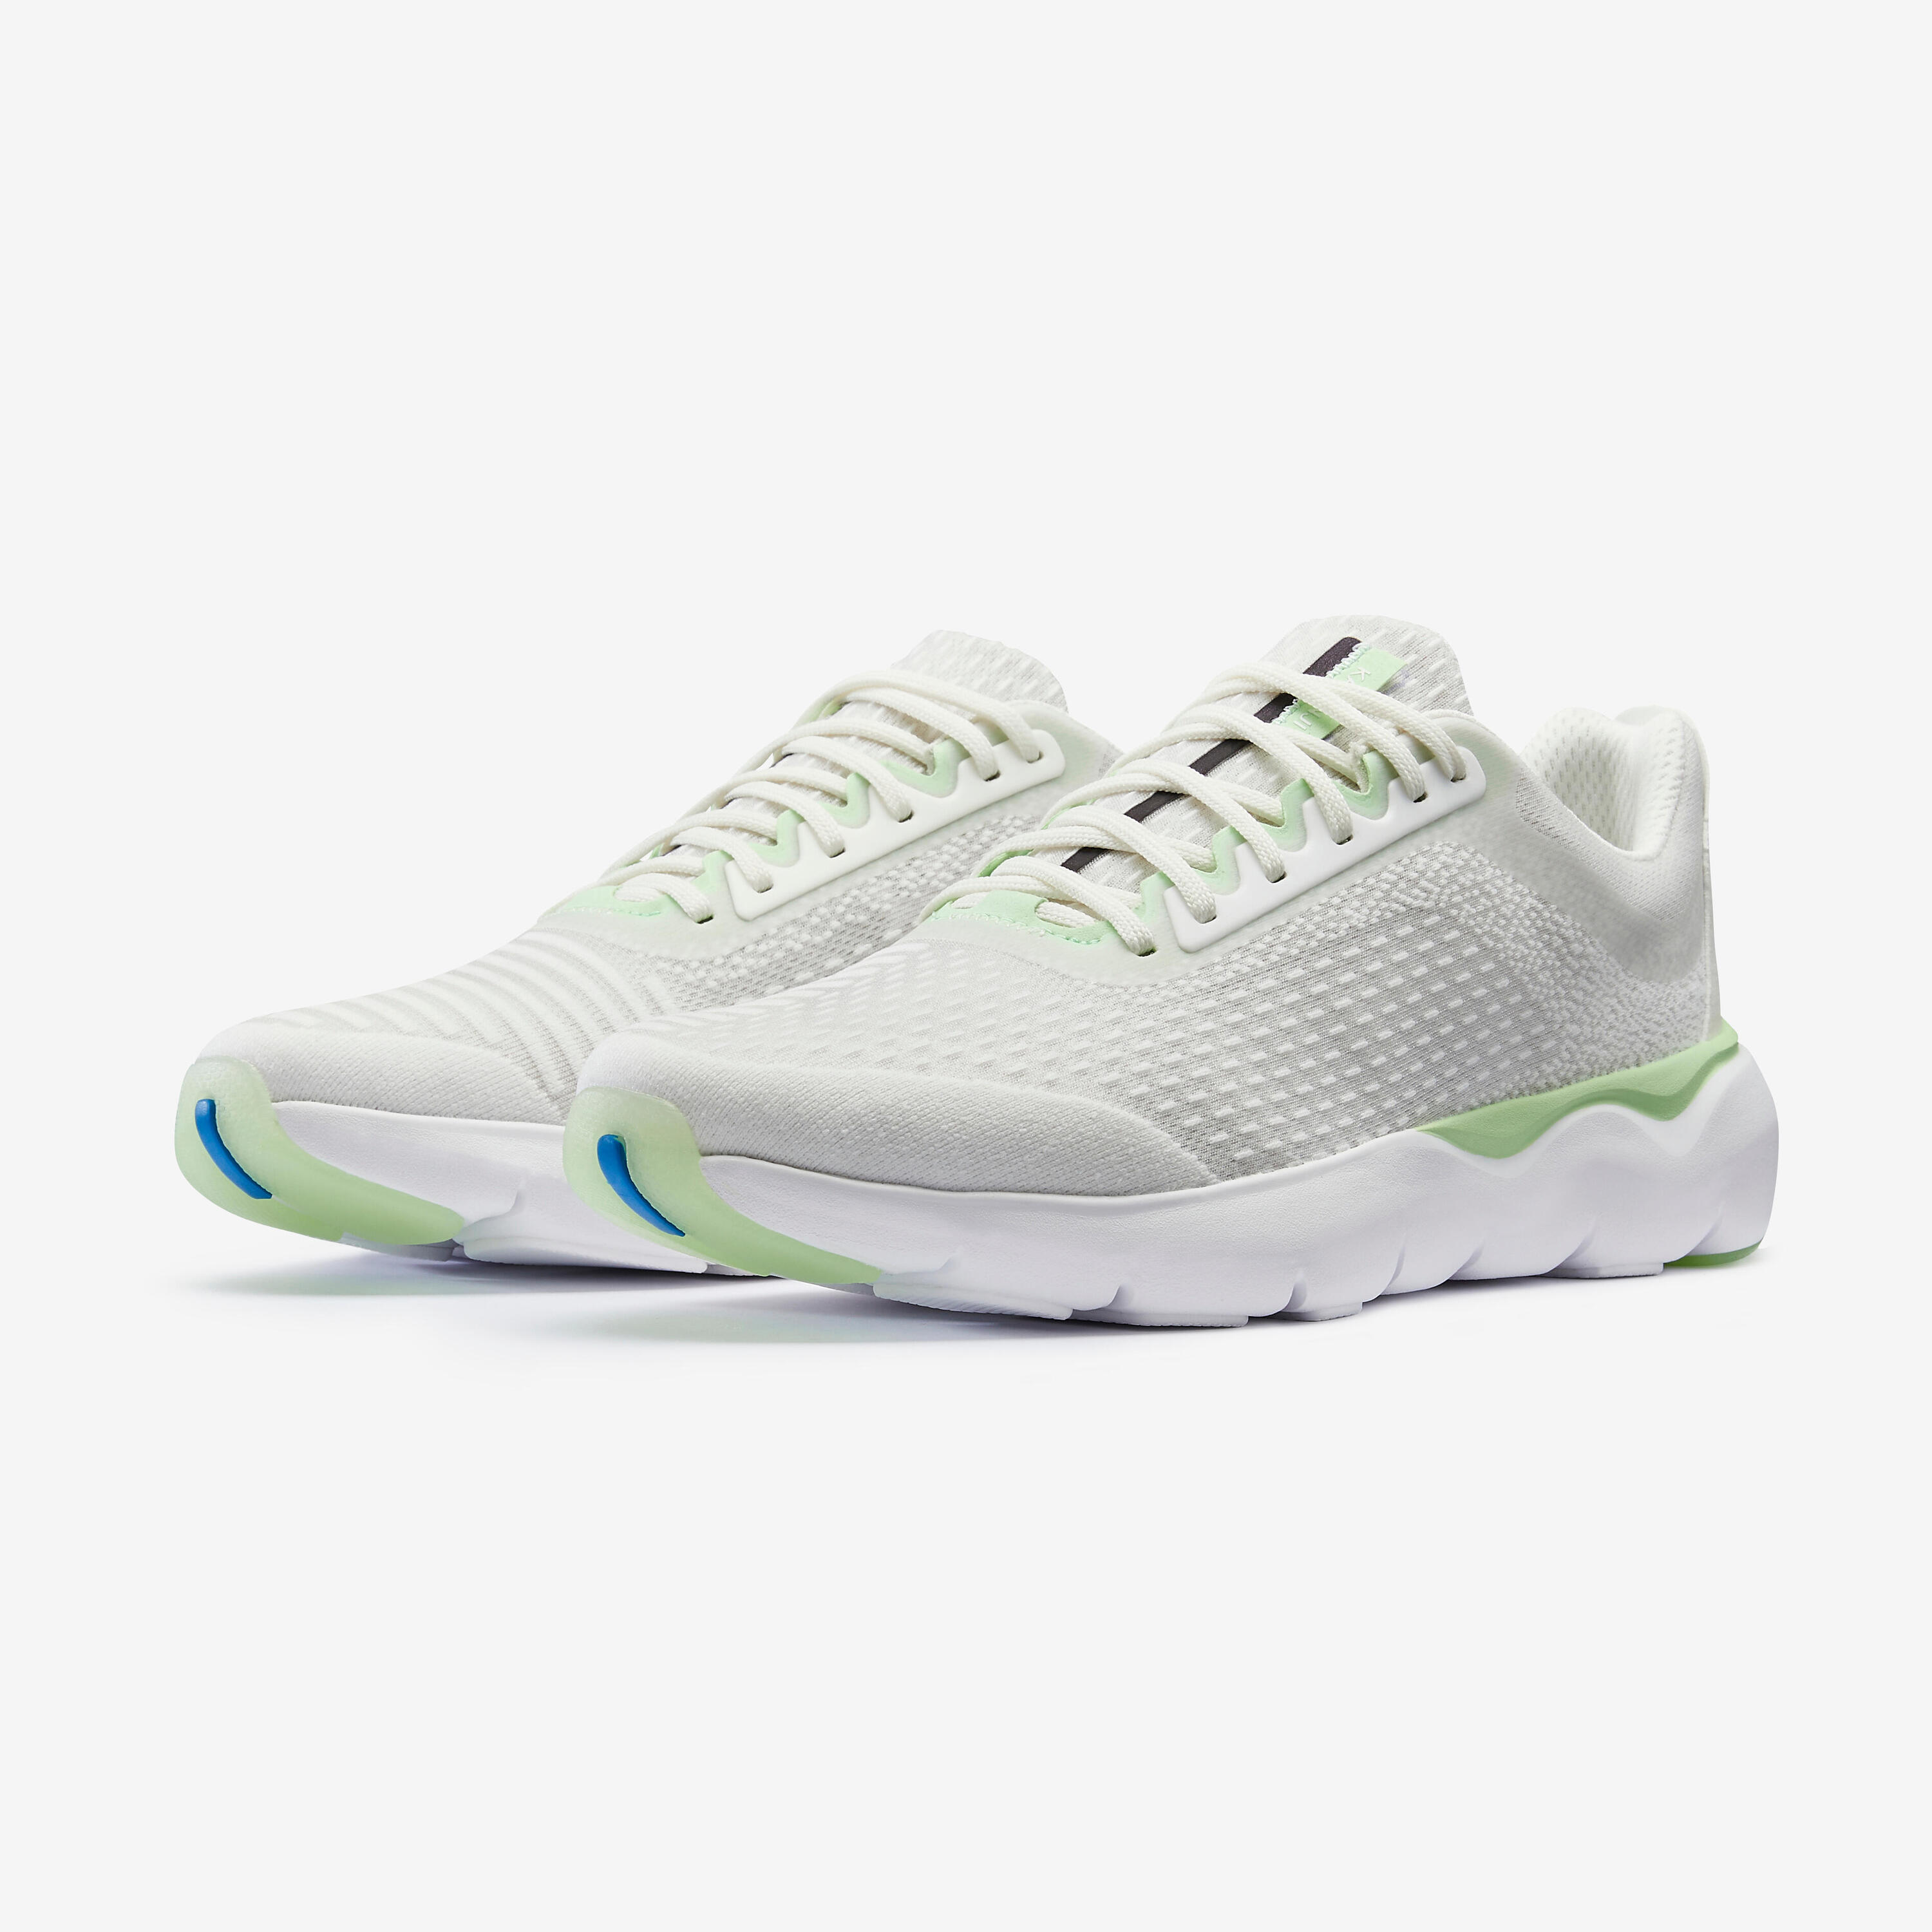 JOGFLOW 500.1 Men's running shoes - Light Green and Off-White 7/13